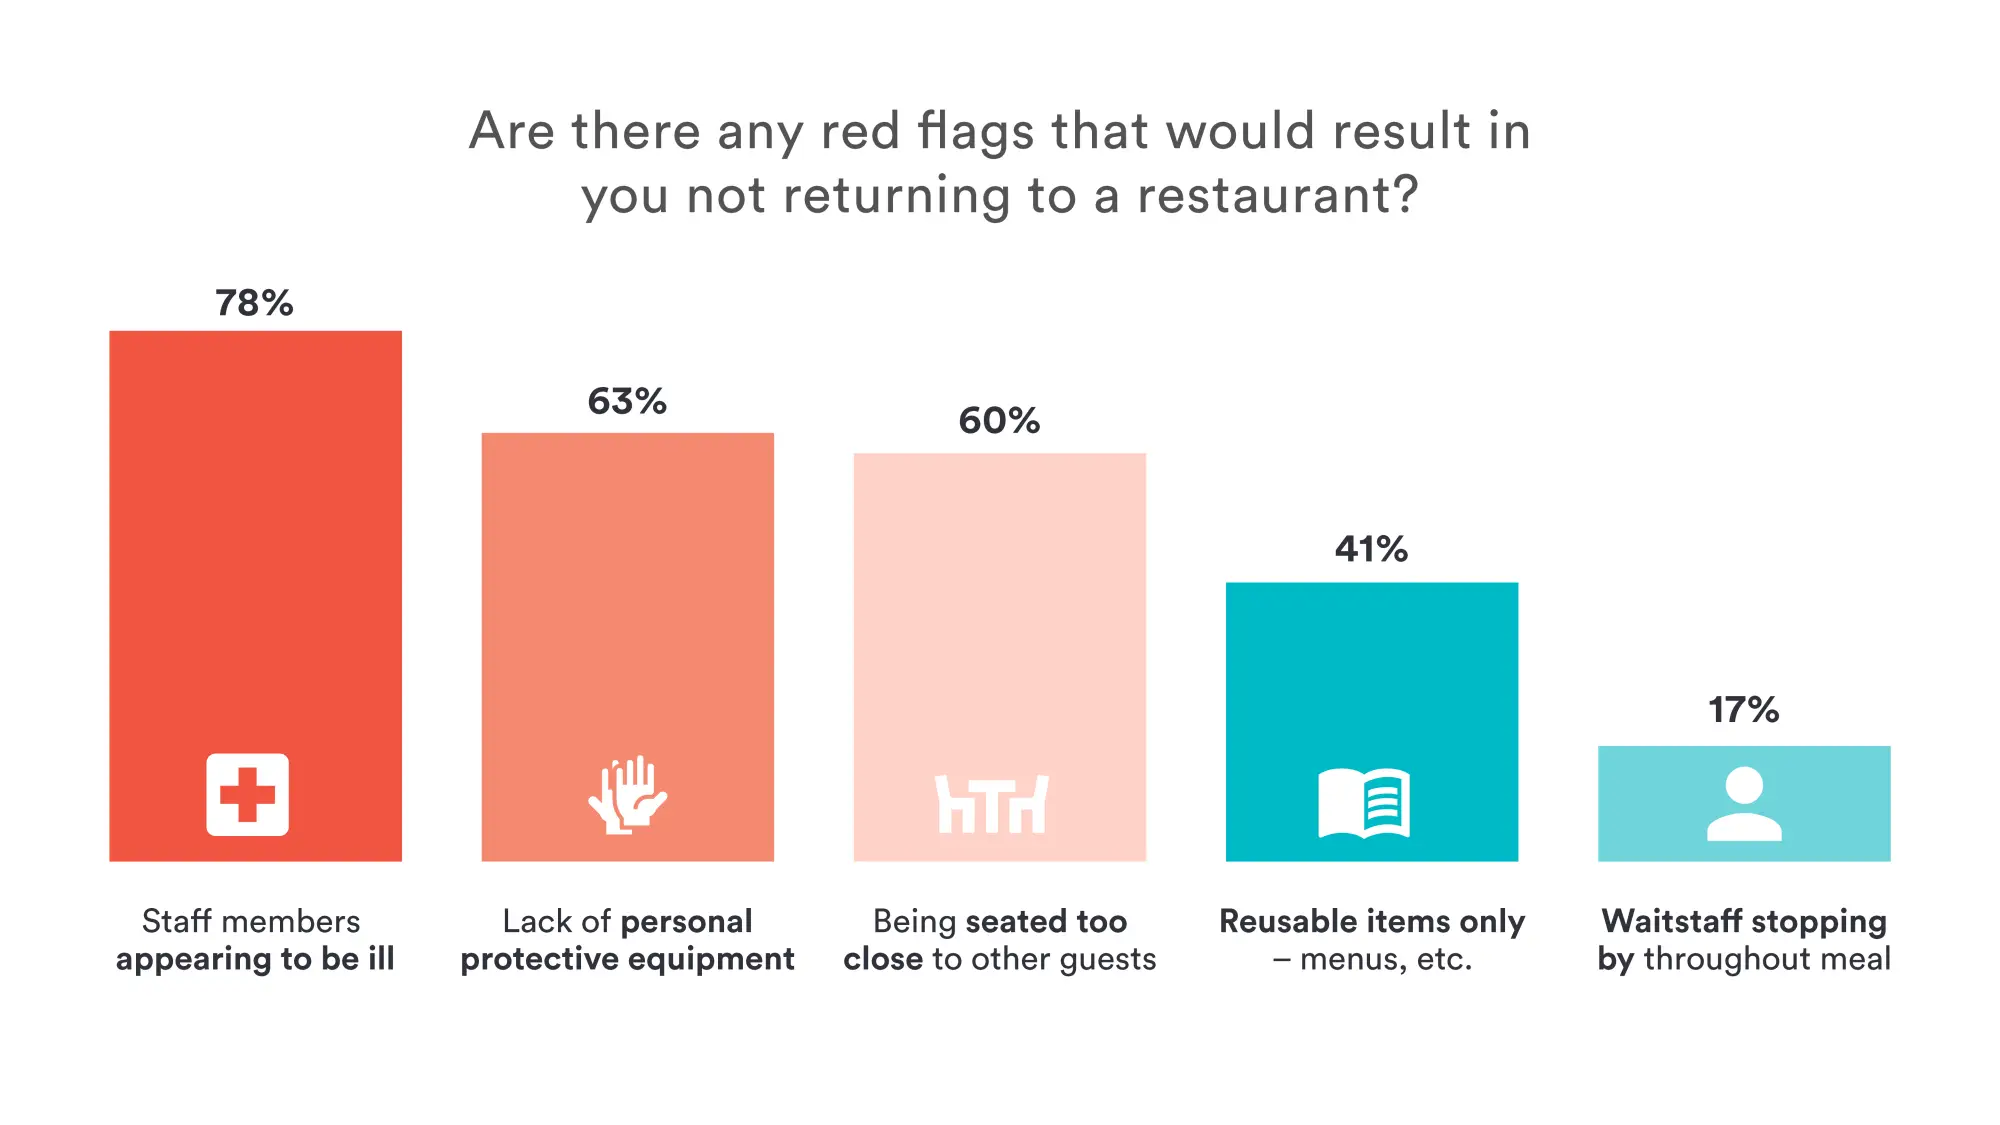 Restaurant Reopening Data: red flags that would influence diners to not return to a restaurant post-COVID-19